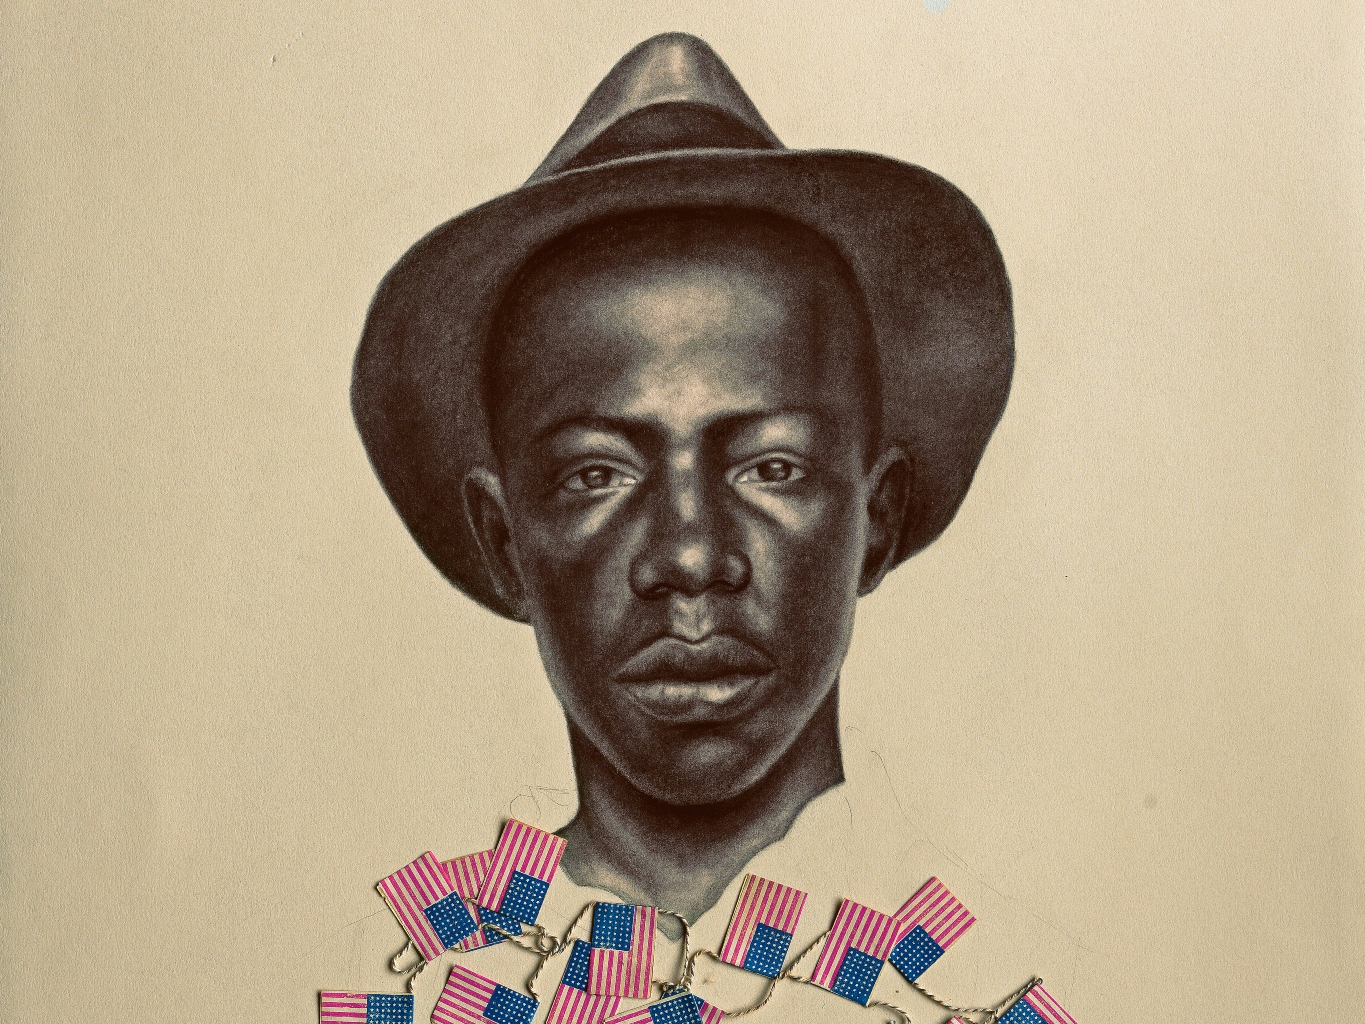 Drawing of a man wearing a hat with a chain of American flags added to the paper beneath his neck.